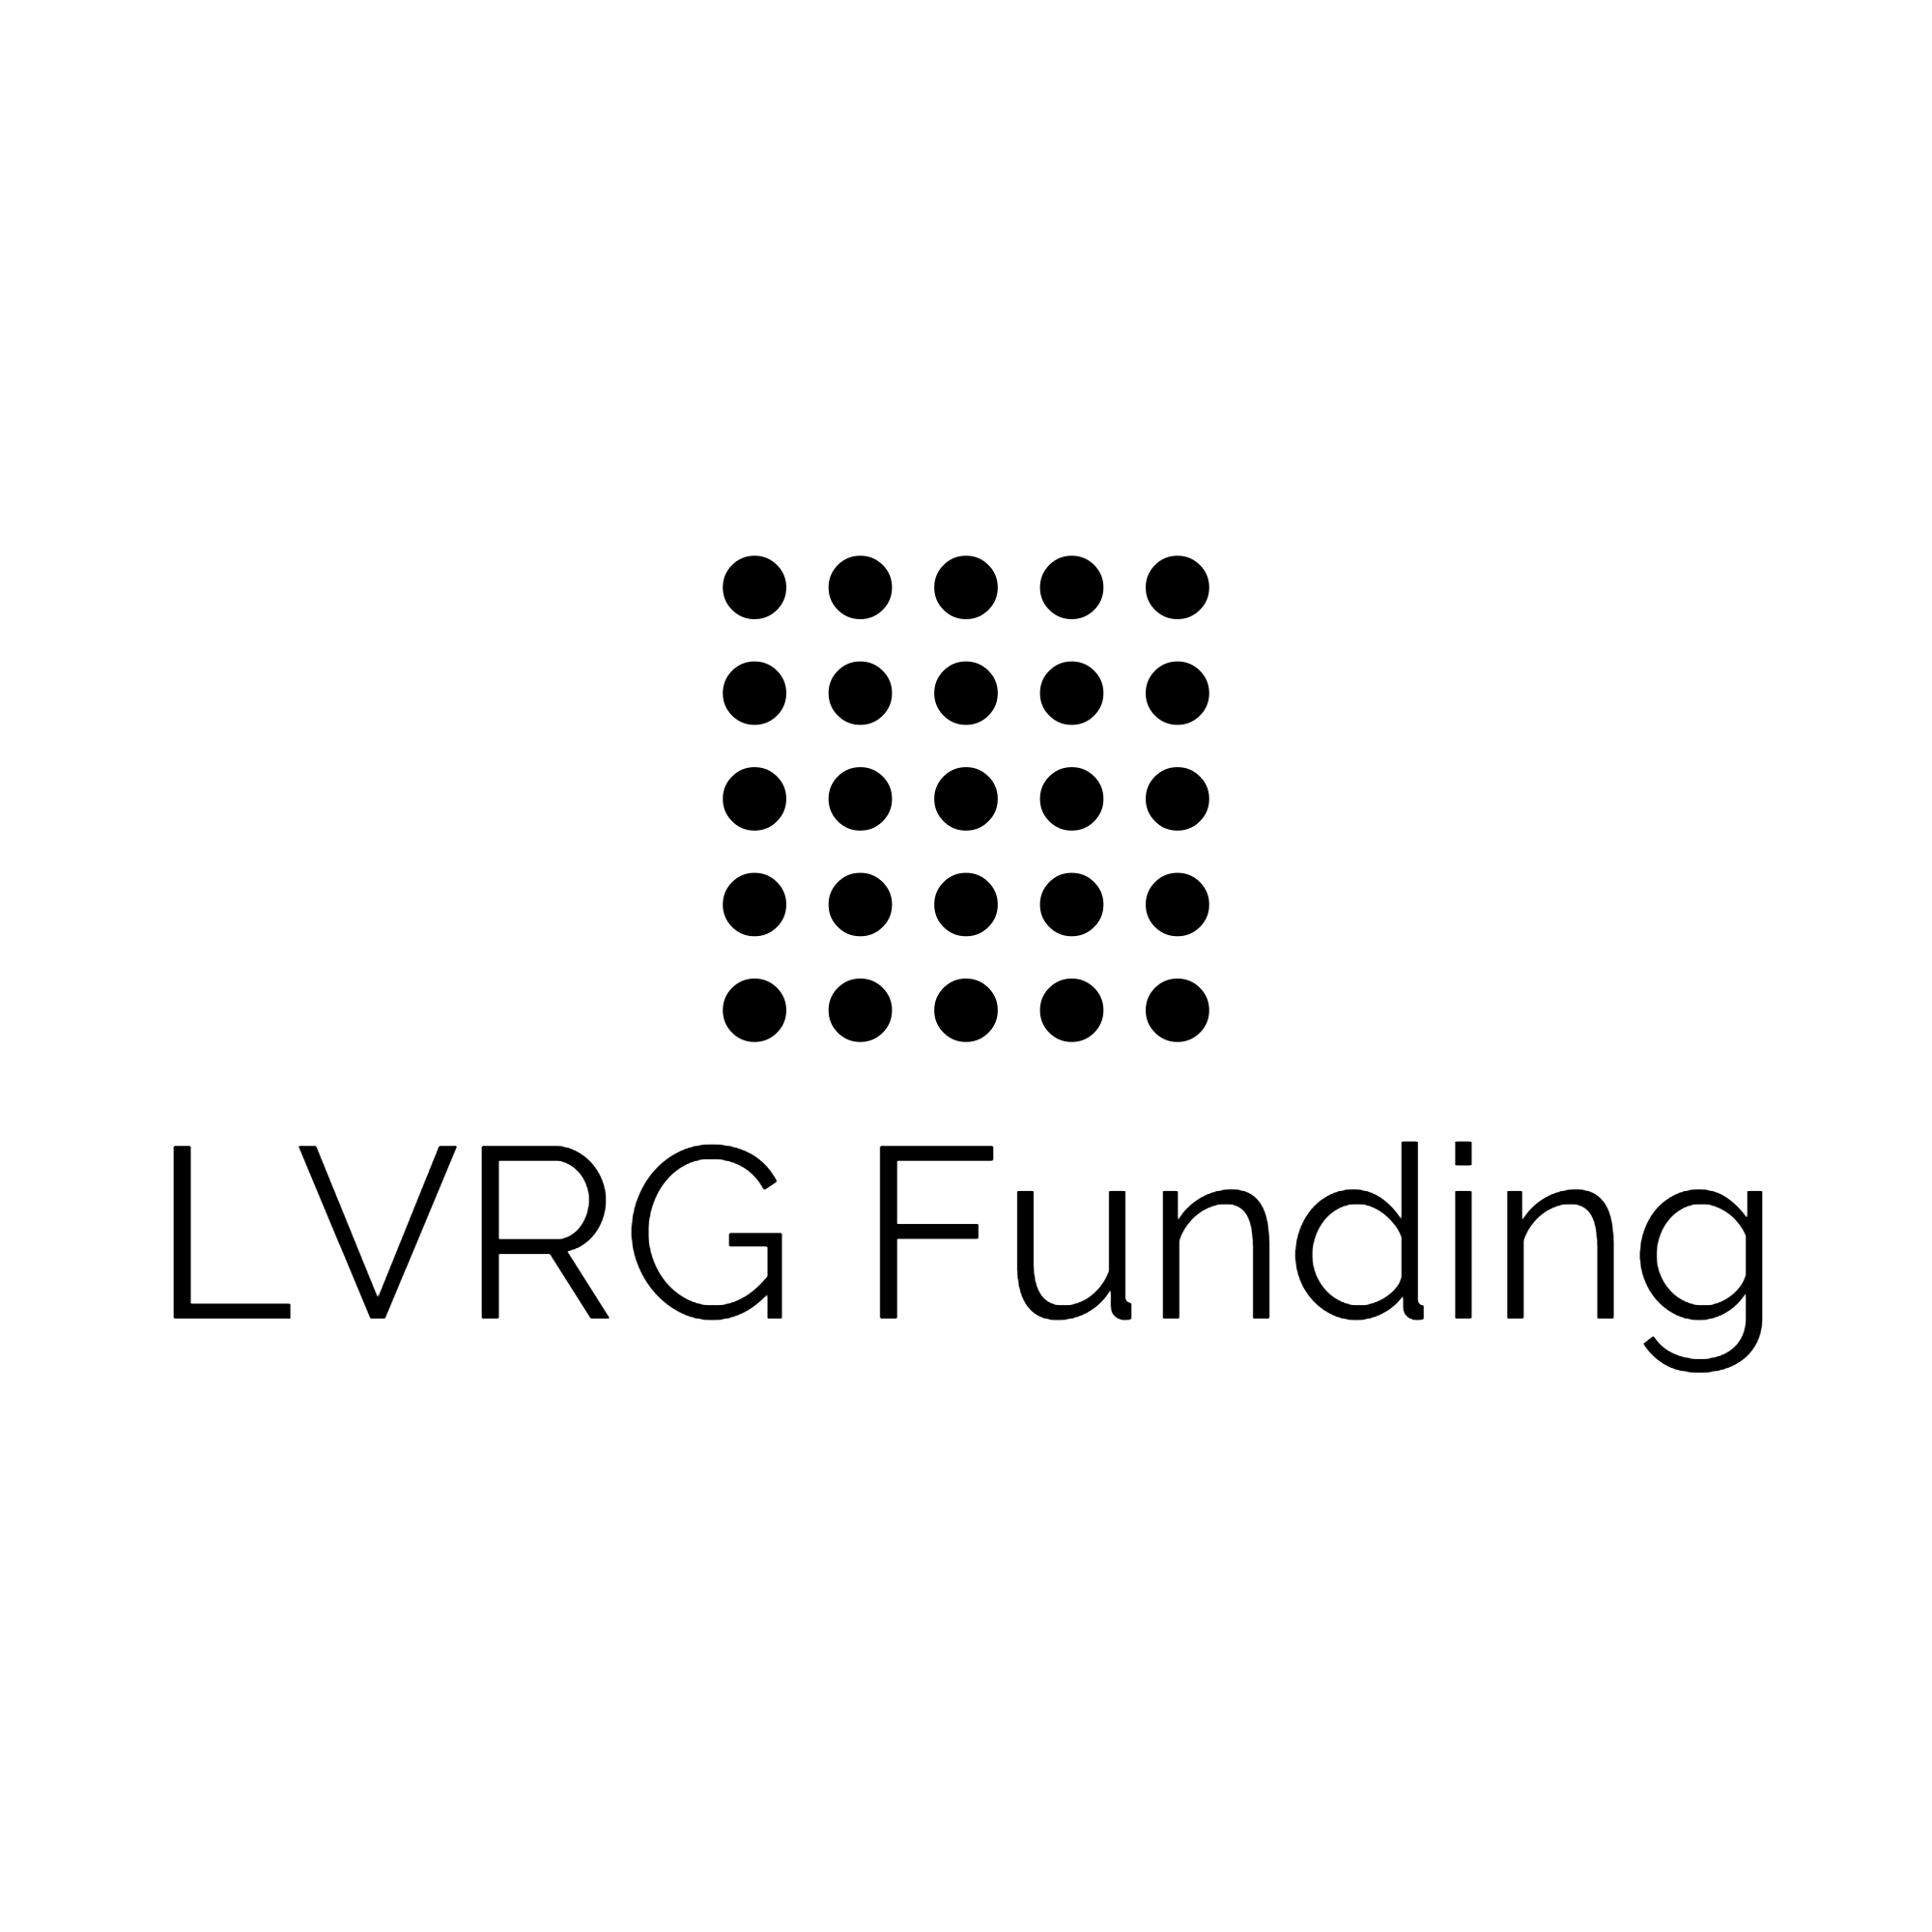 LVRG Funding - Let's GROW Your Business!